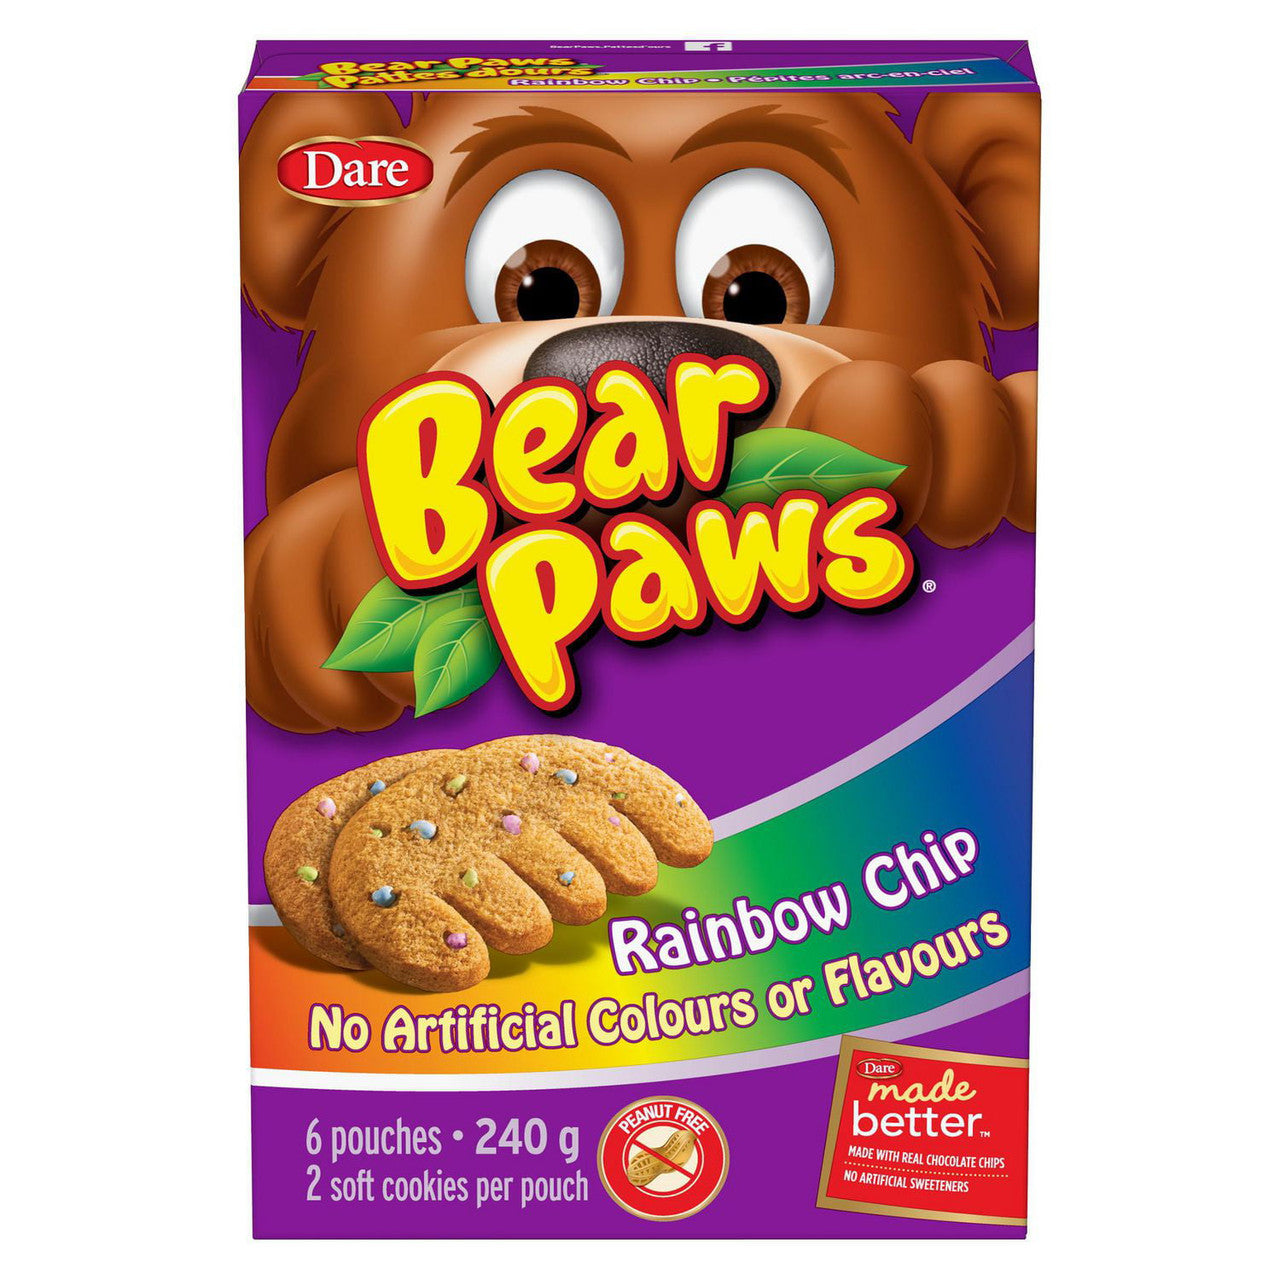 Dare Bear Paws Rainbow Chip Cookies, 240g/8.4 oz, 6 Pouches, 1 Box {Imported from Canada}